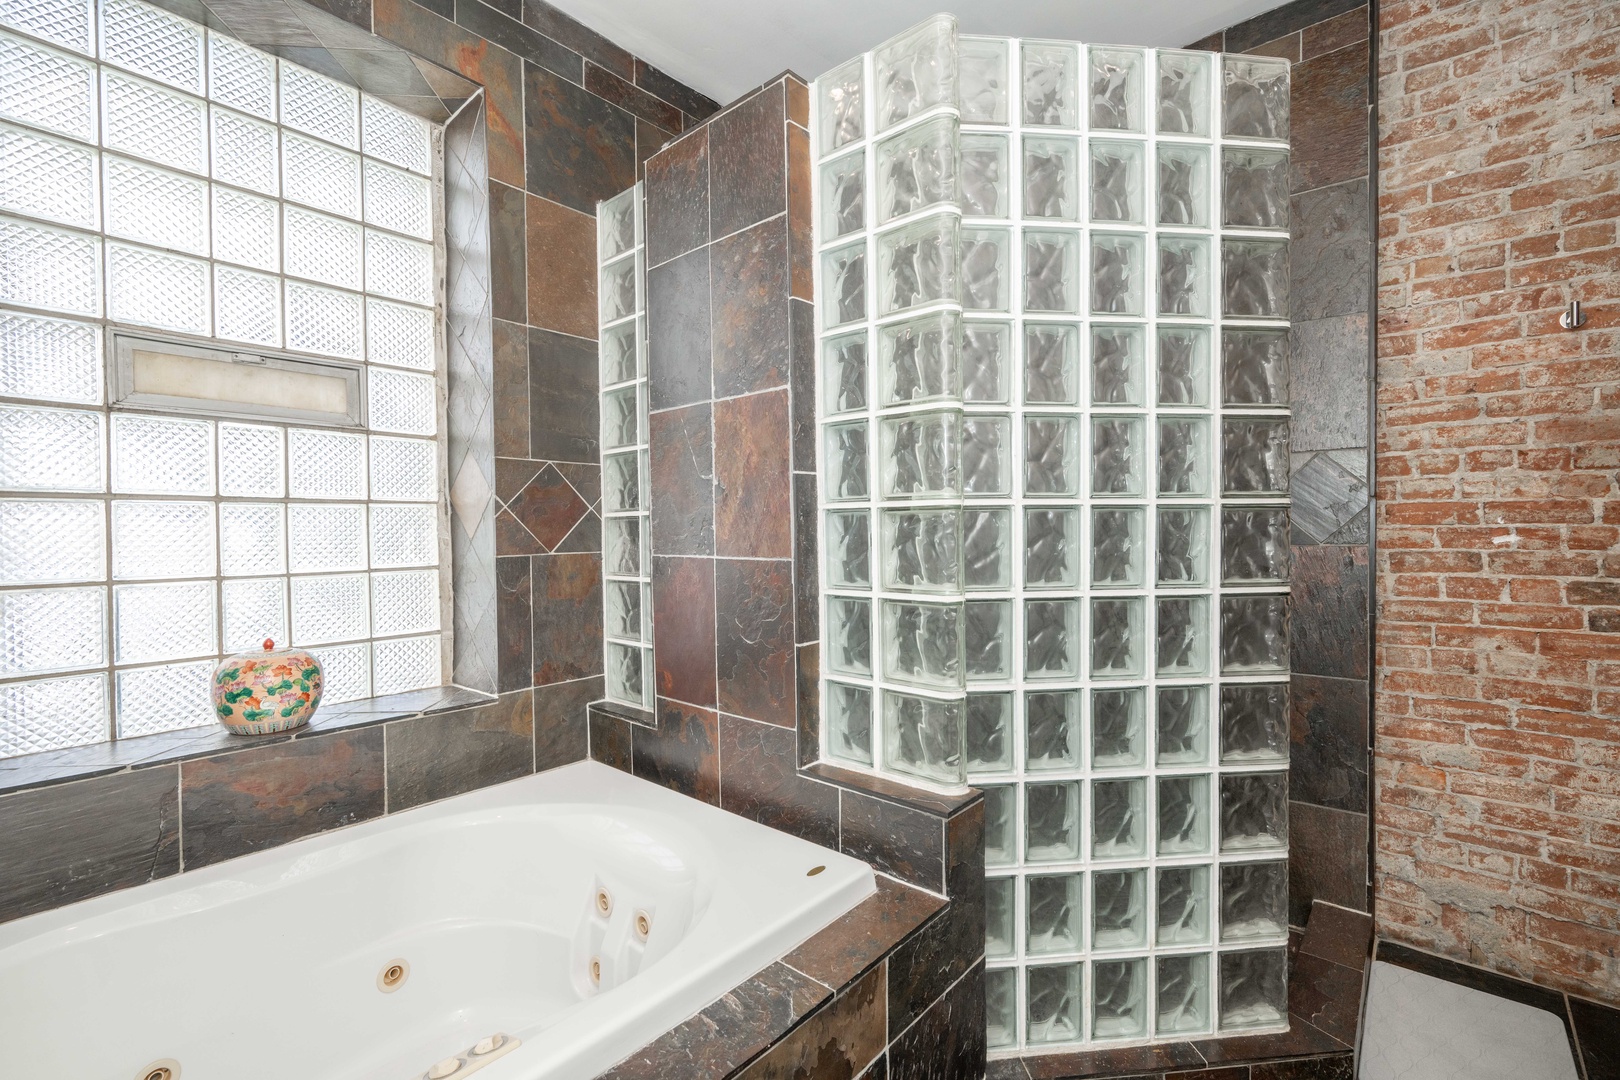 Indulge in the master bath's jetted tub, walk-in shower, & large double vanity